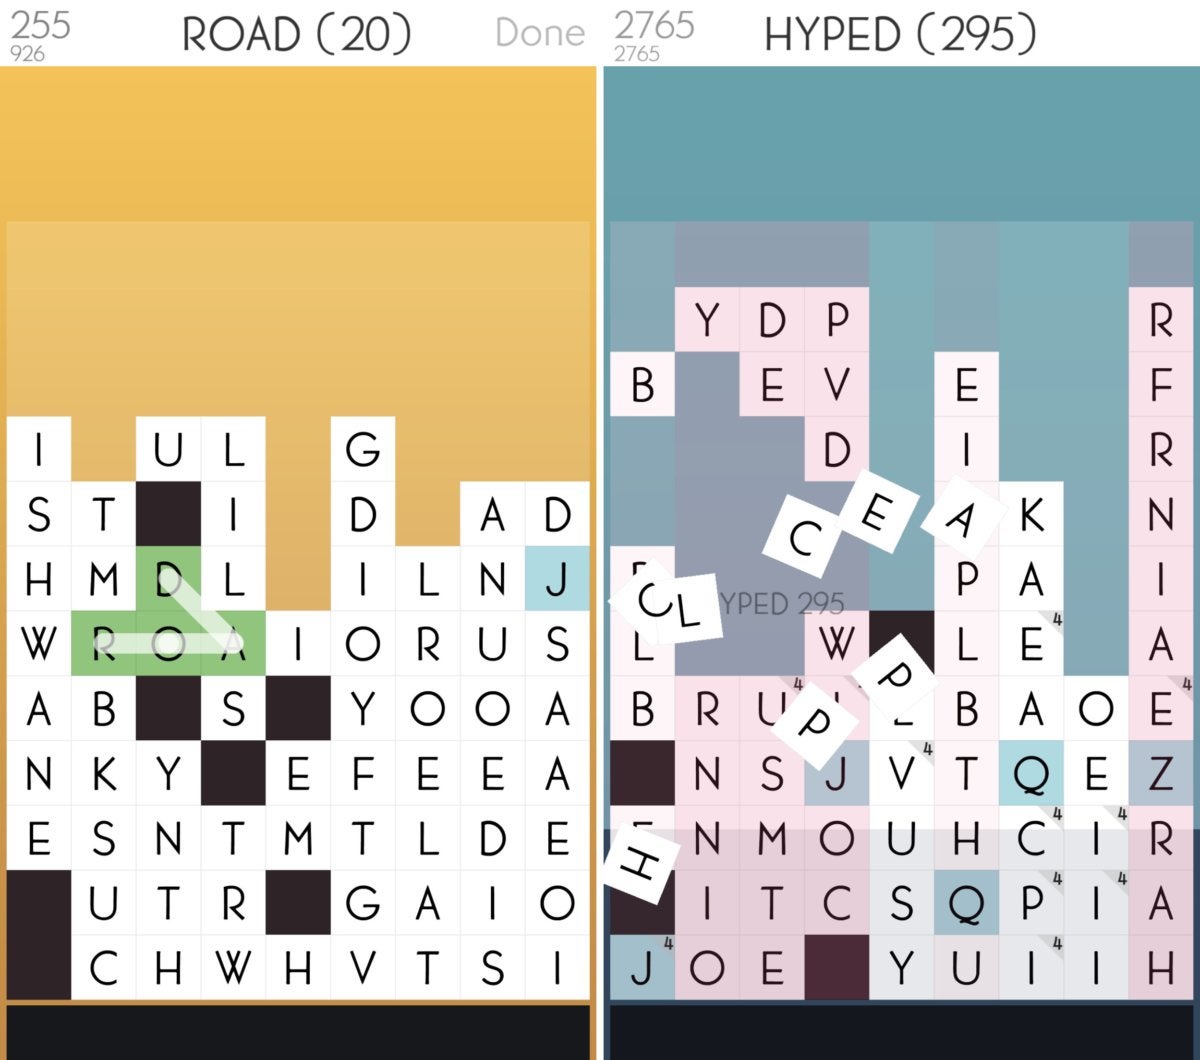 download the new for ios Get the Word! - Words Game